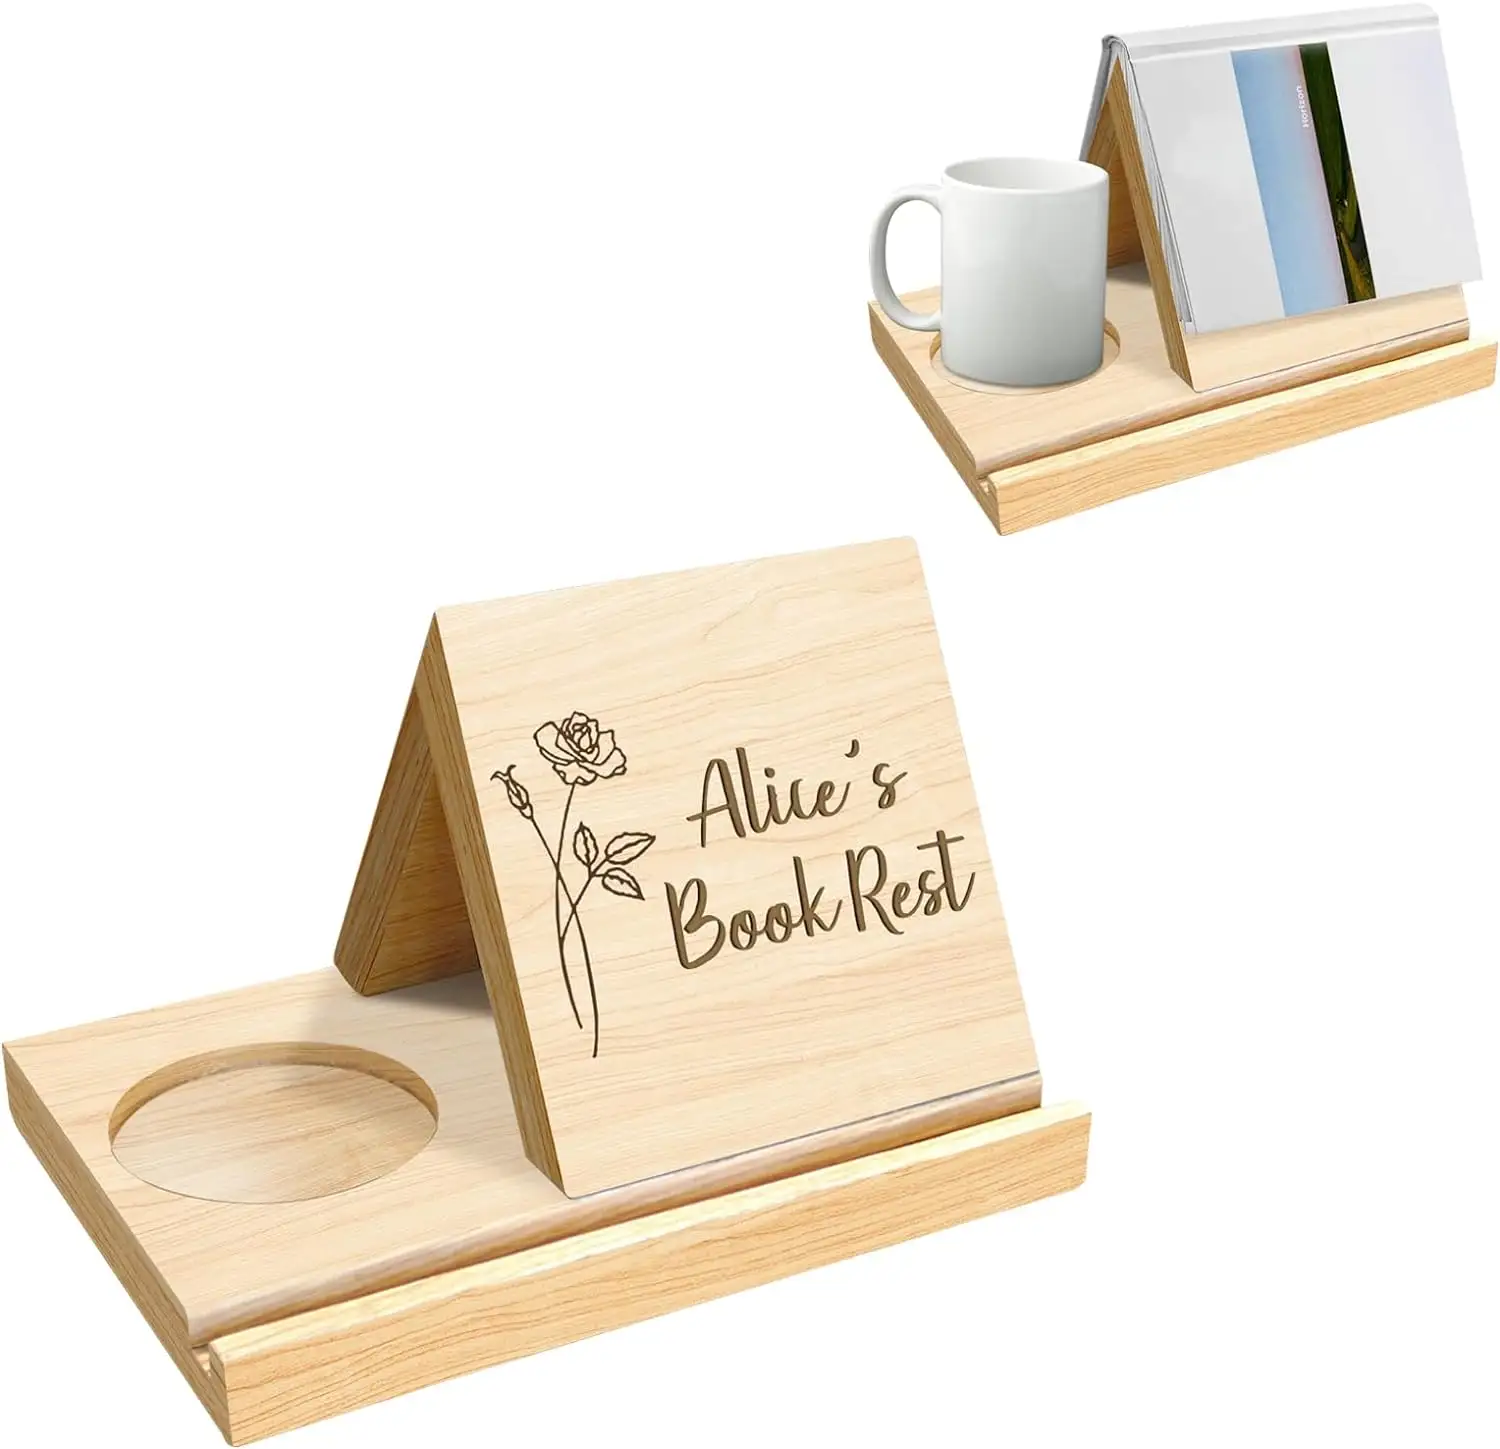 Personalized Custom Solid Oak Wooden Triangle Bookshelf Book Stand Holder with Coffee Drink Holder